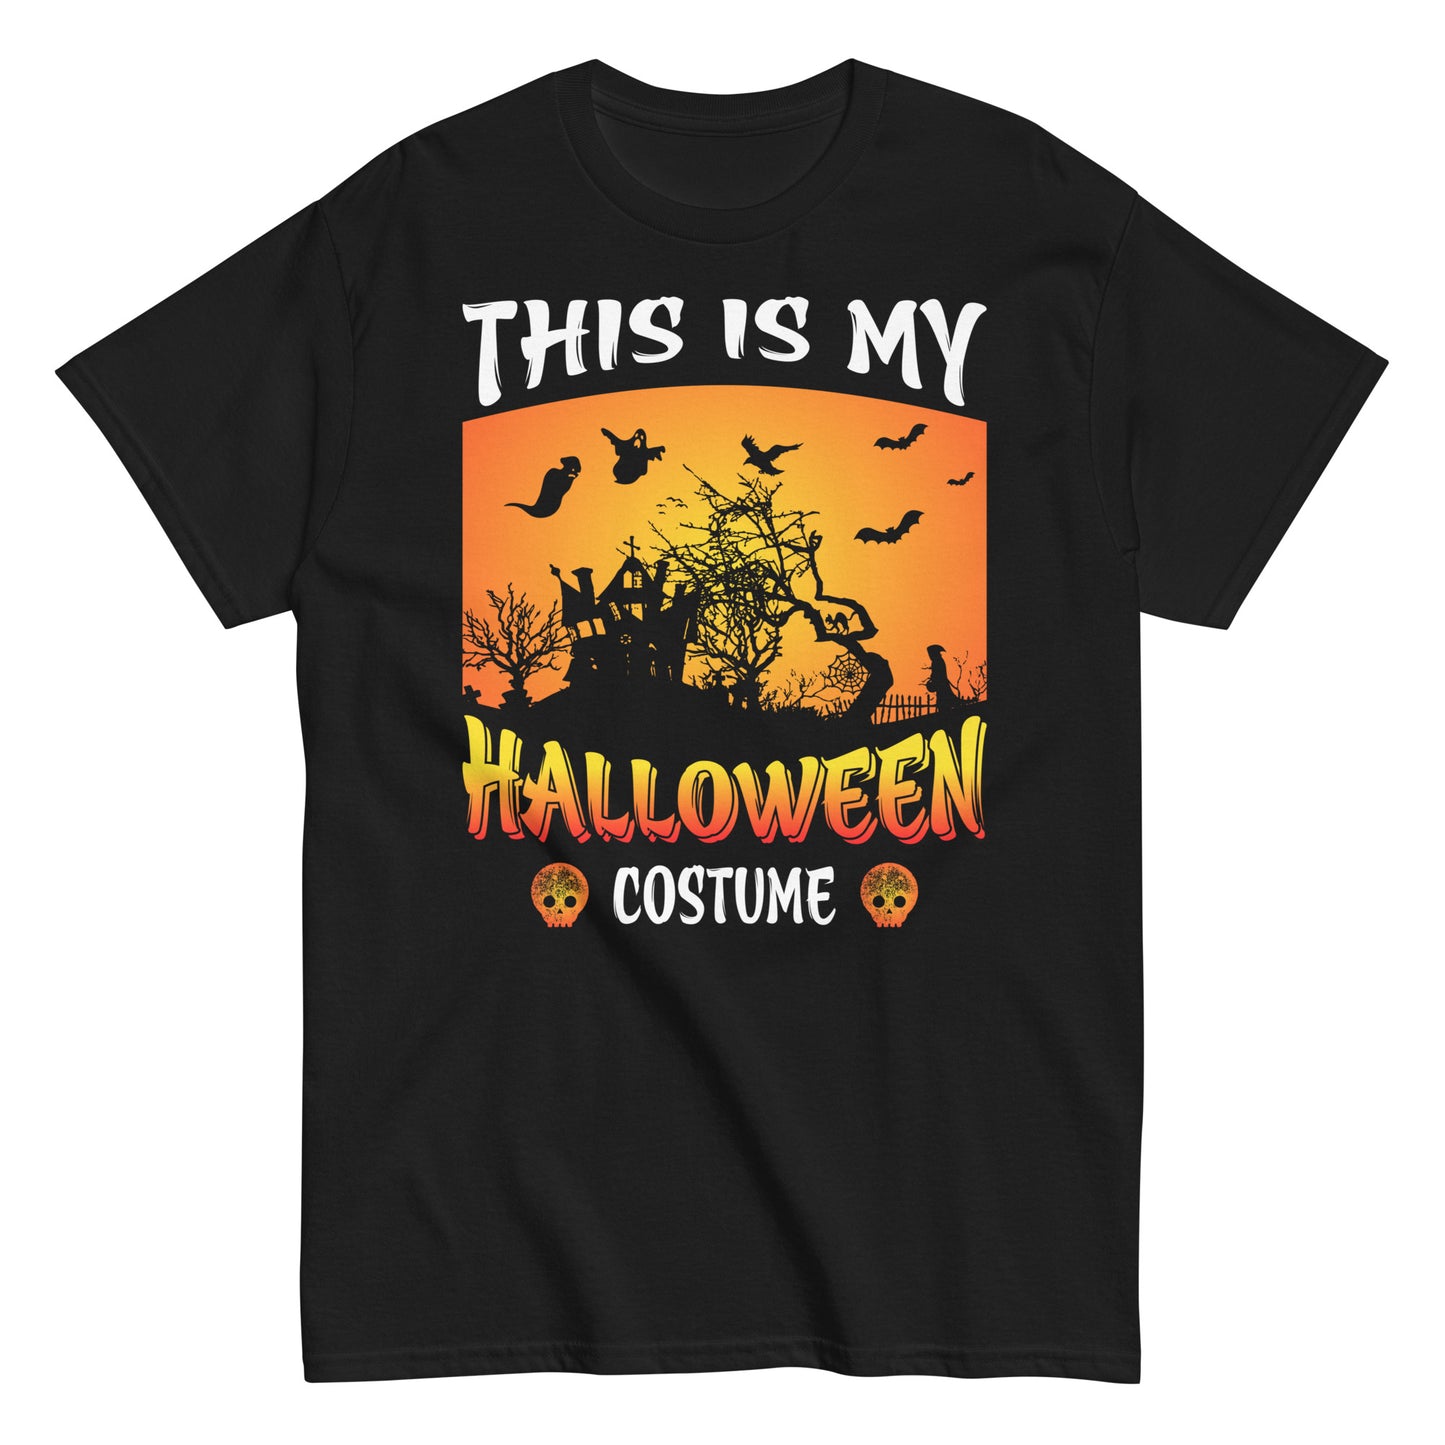 Get Your Boo On with Our Halloween-Themed Tee